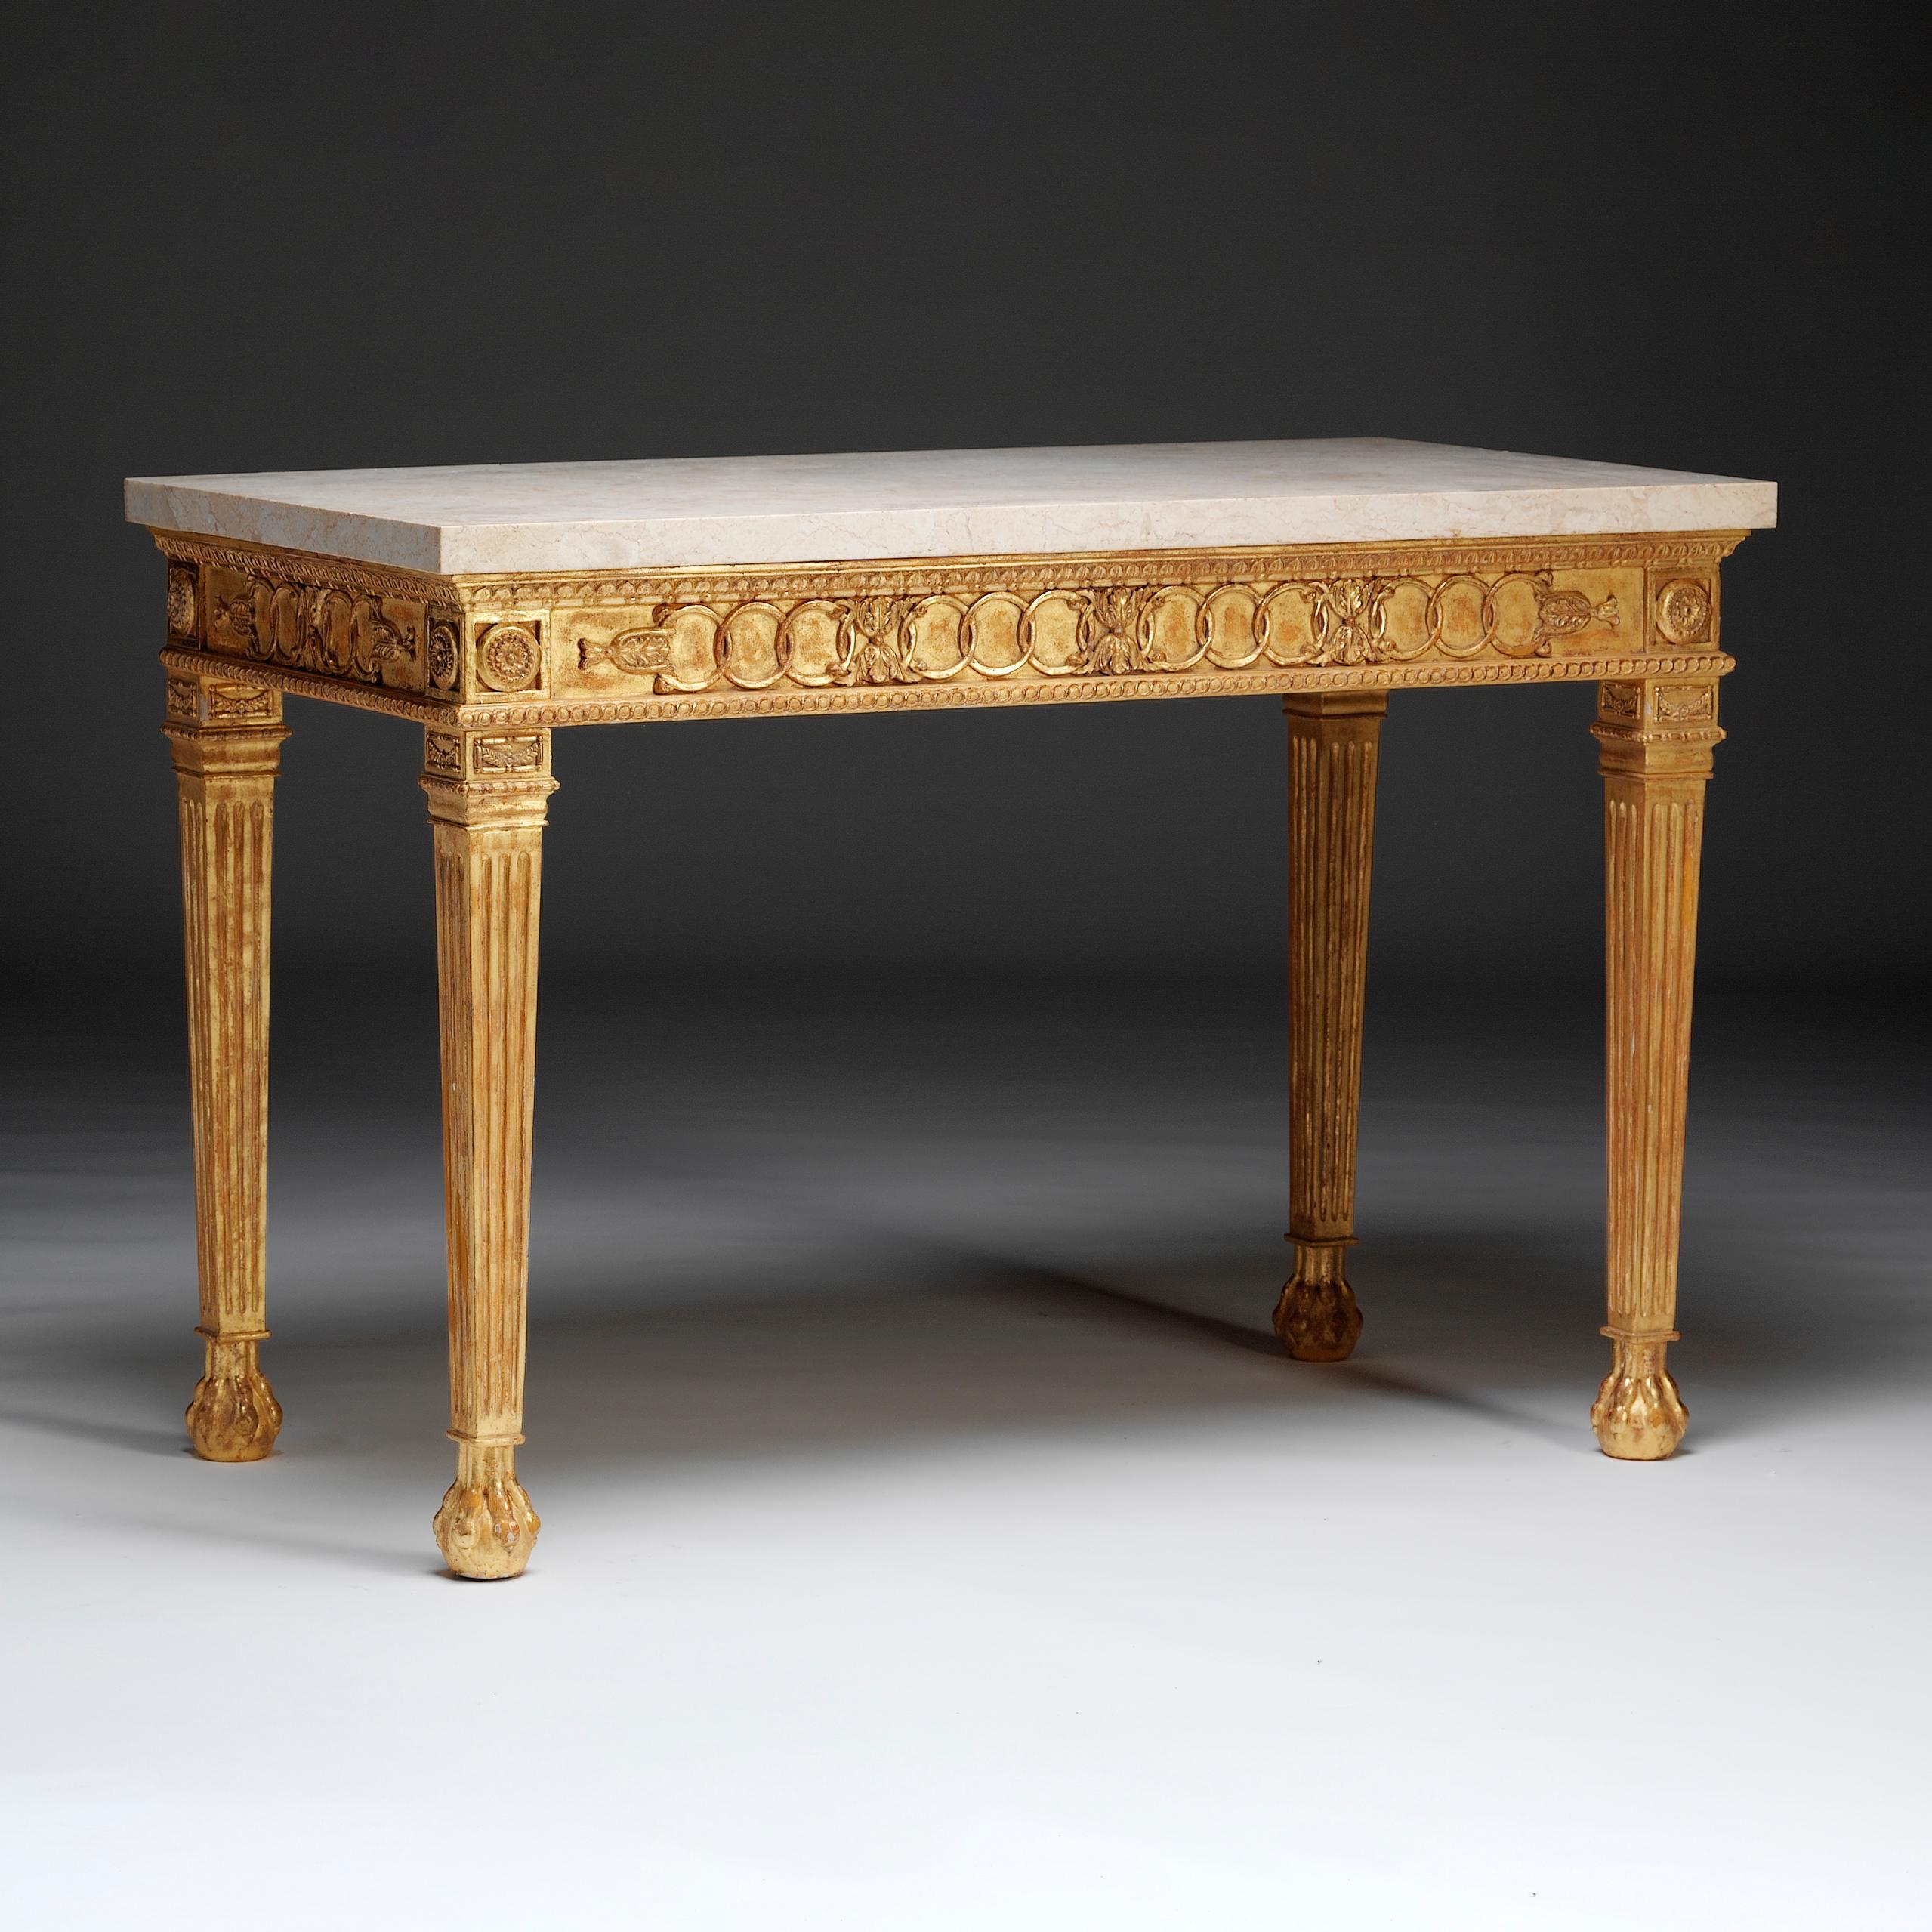 A Neoclassical gilt-wood table with marble top above a panelled frieze decorated with interlaced circles puntuated by carved leaves spaced by mouldings. The square tapered and fluted legs are headed by paterae, carved collars and are raised on lion